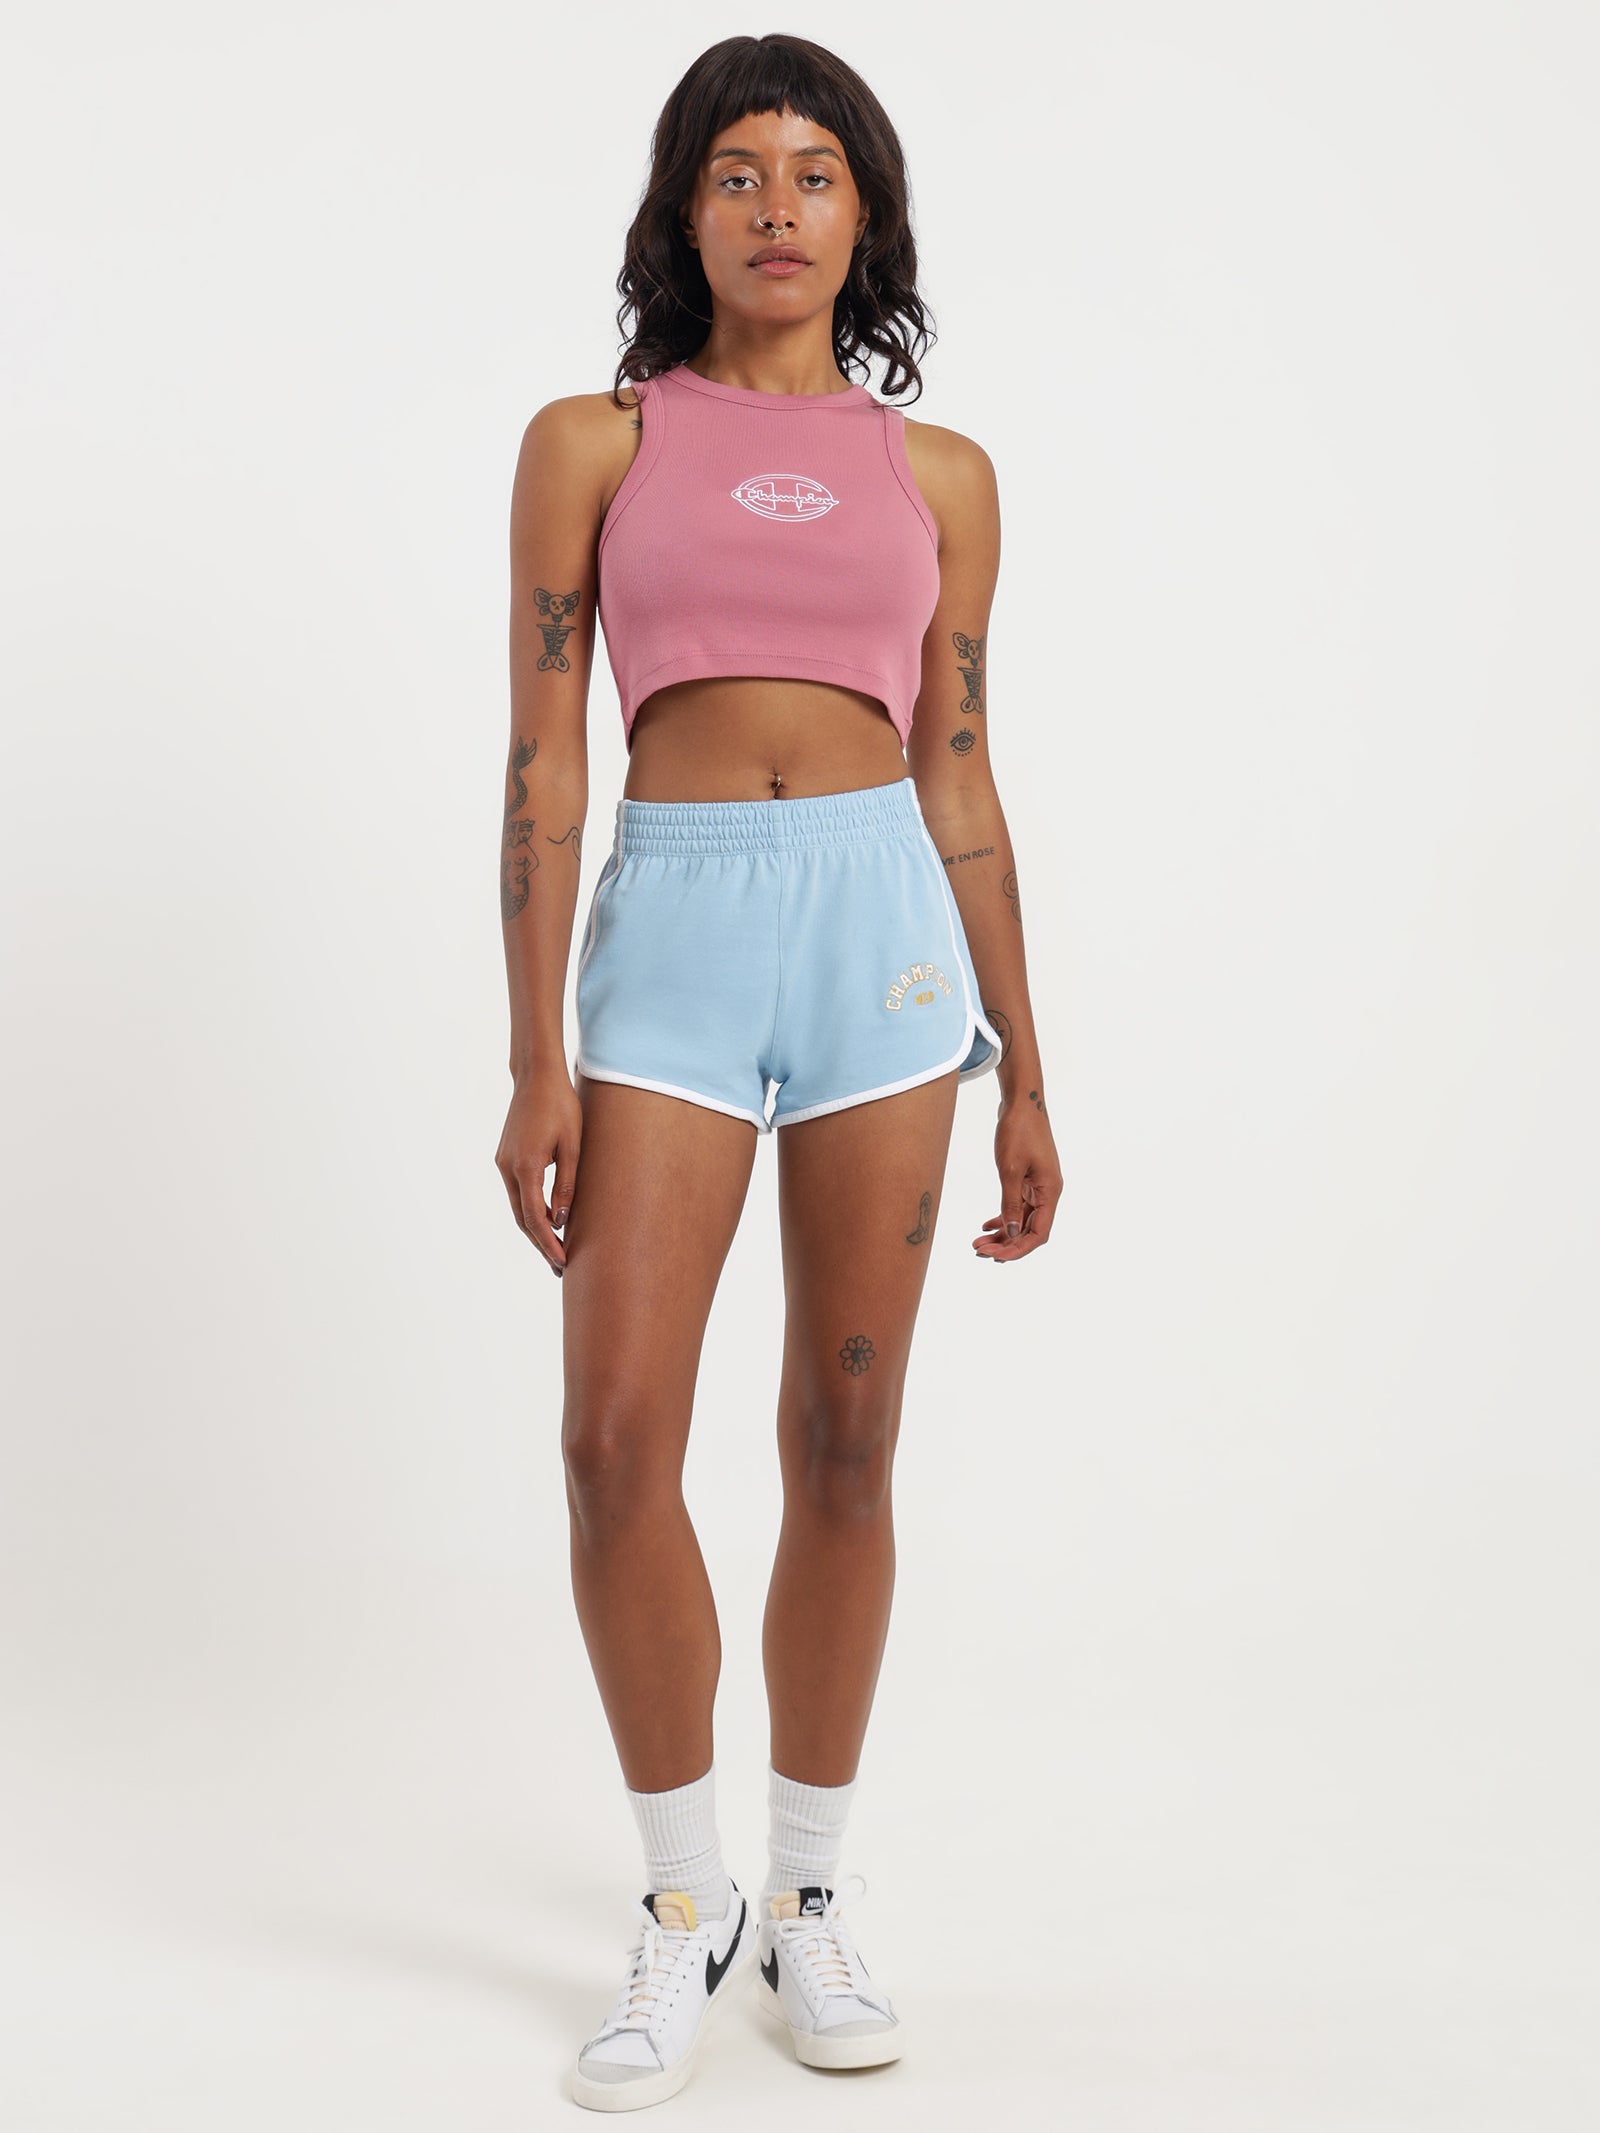 Heritage 90's Cropped Rib Tank in Terracotta Pink